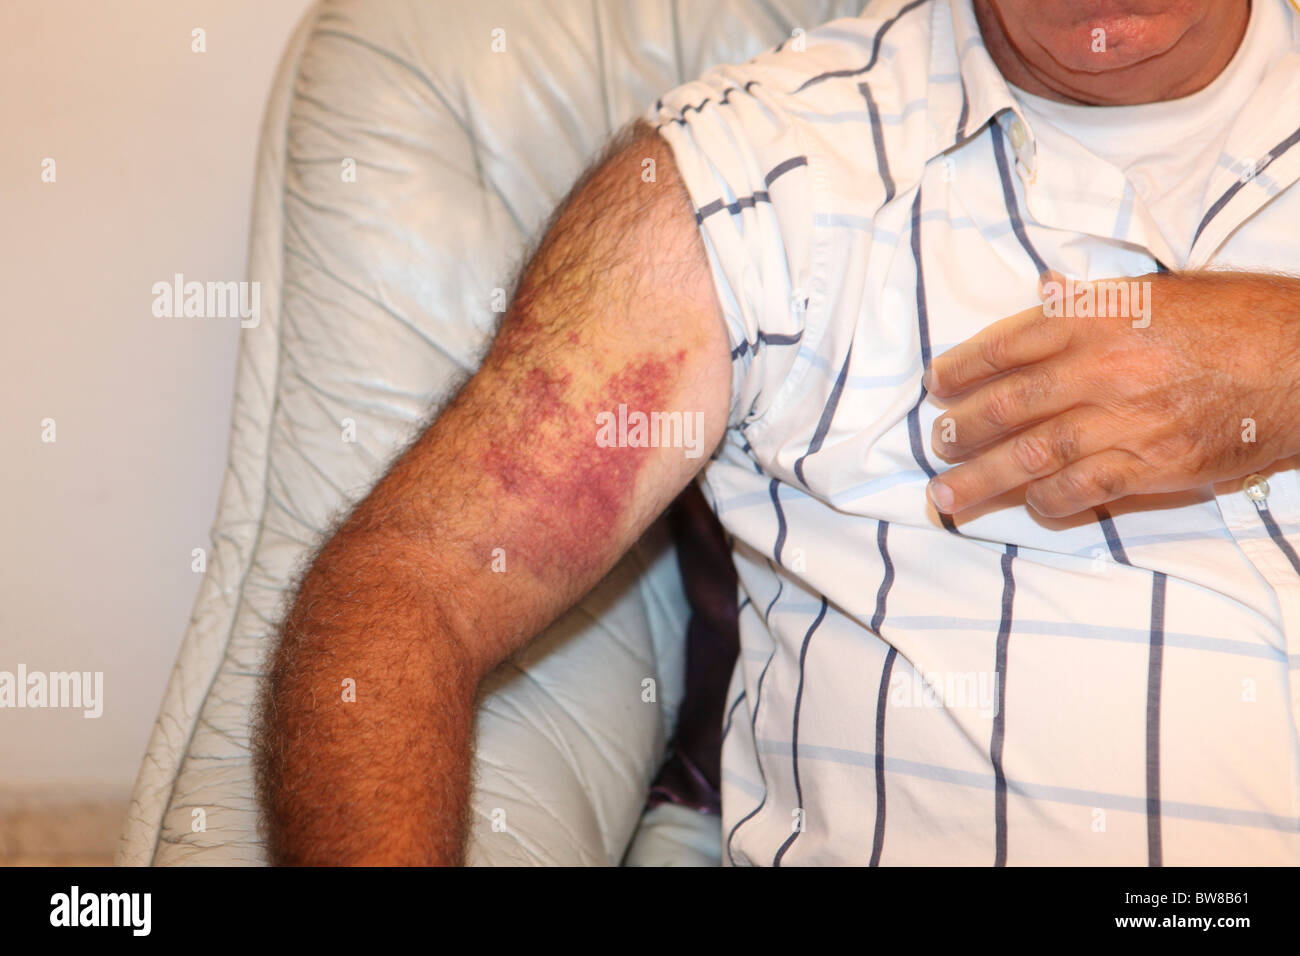 Erysipelas on an arm. Close-up of swollen & inflamed skin of a young man. Stock Photo